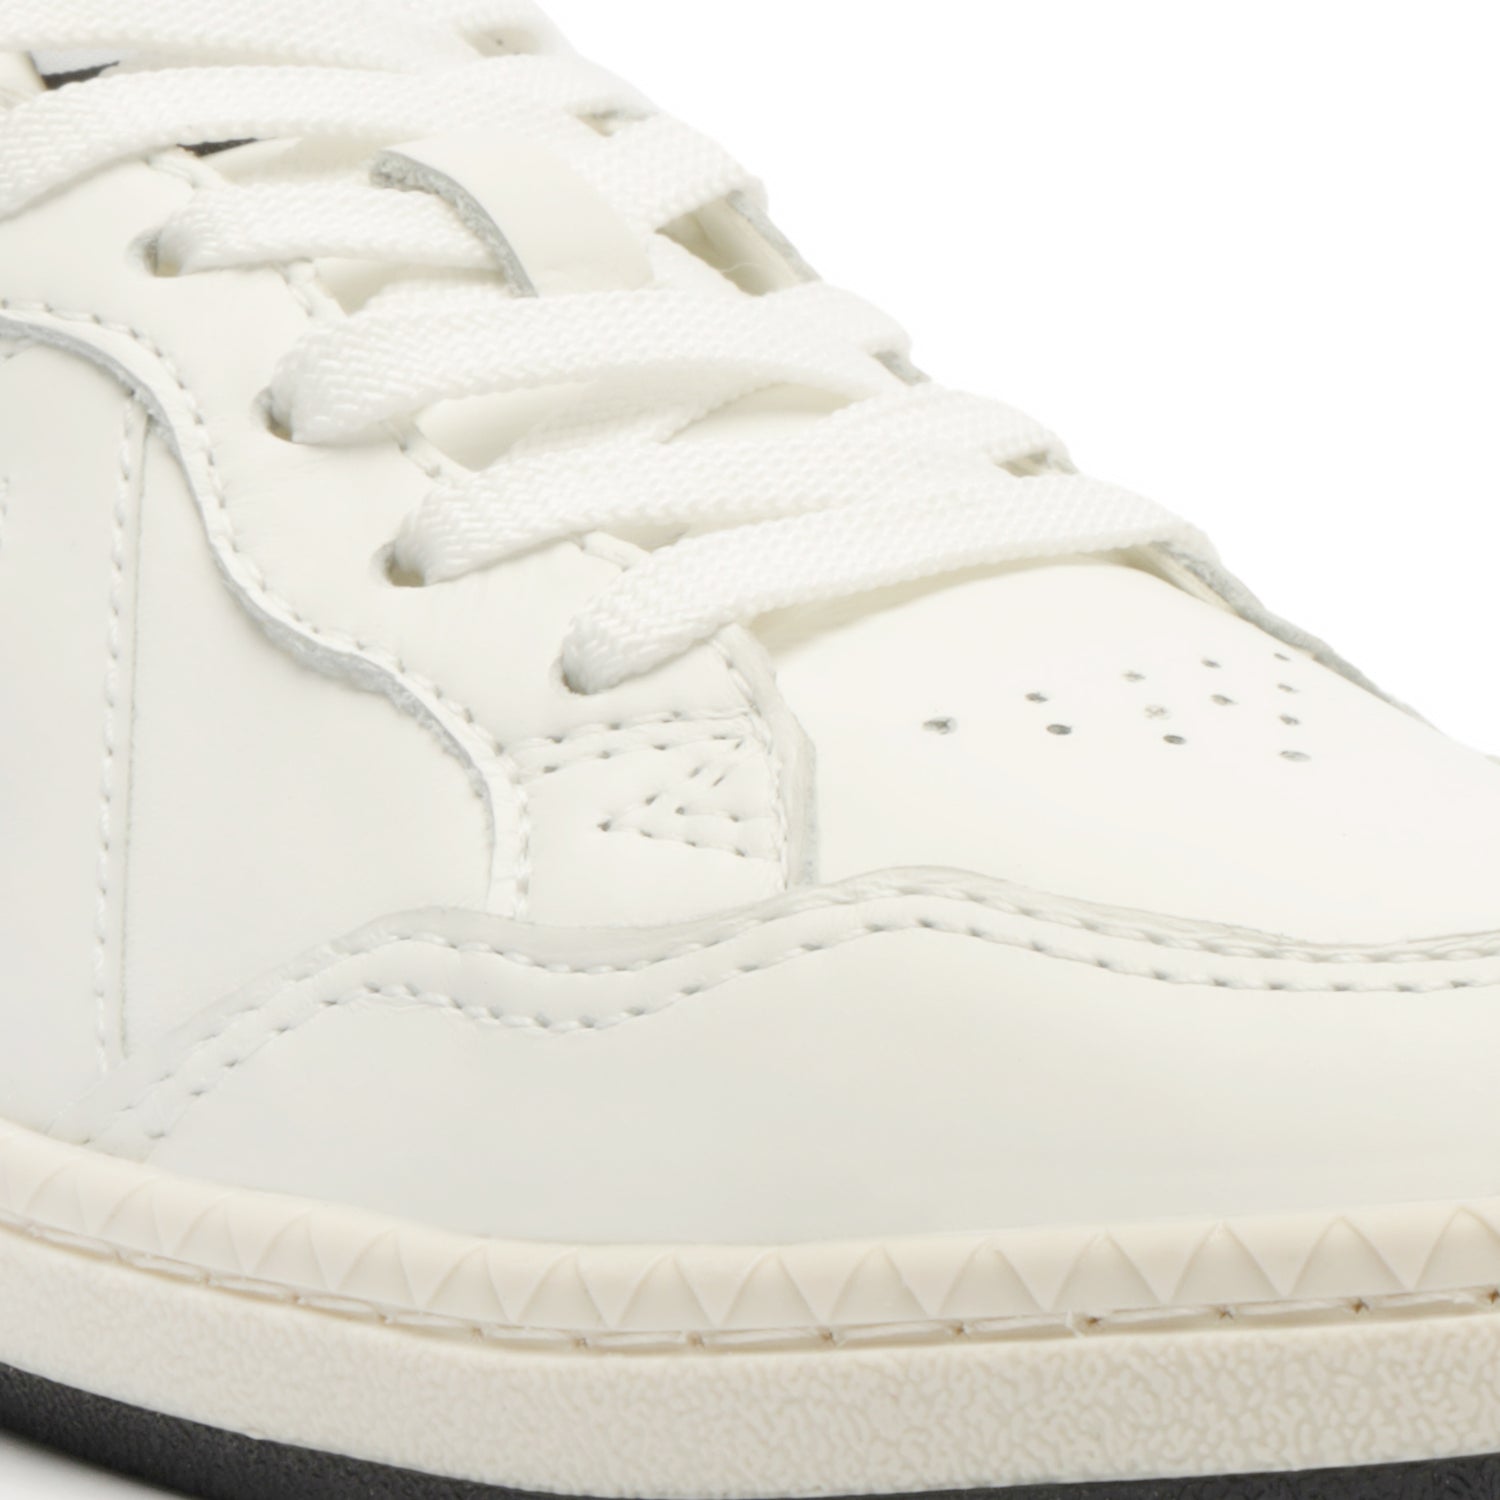 ST-001 Leather Sneaker Sneakers CO    - Schutz Shoes